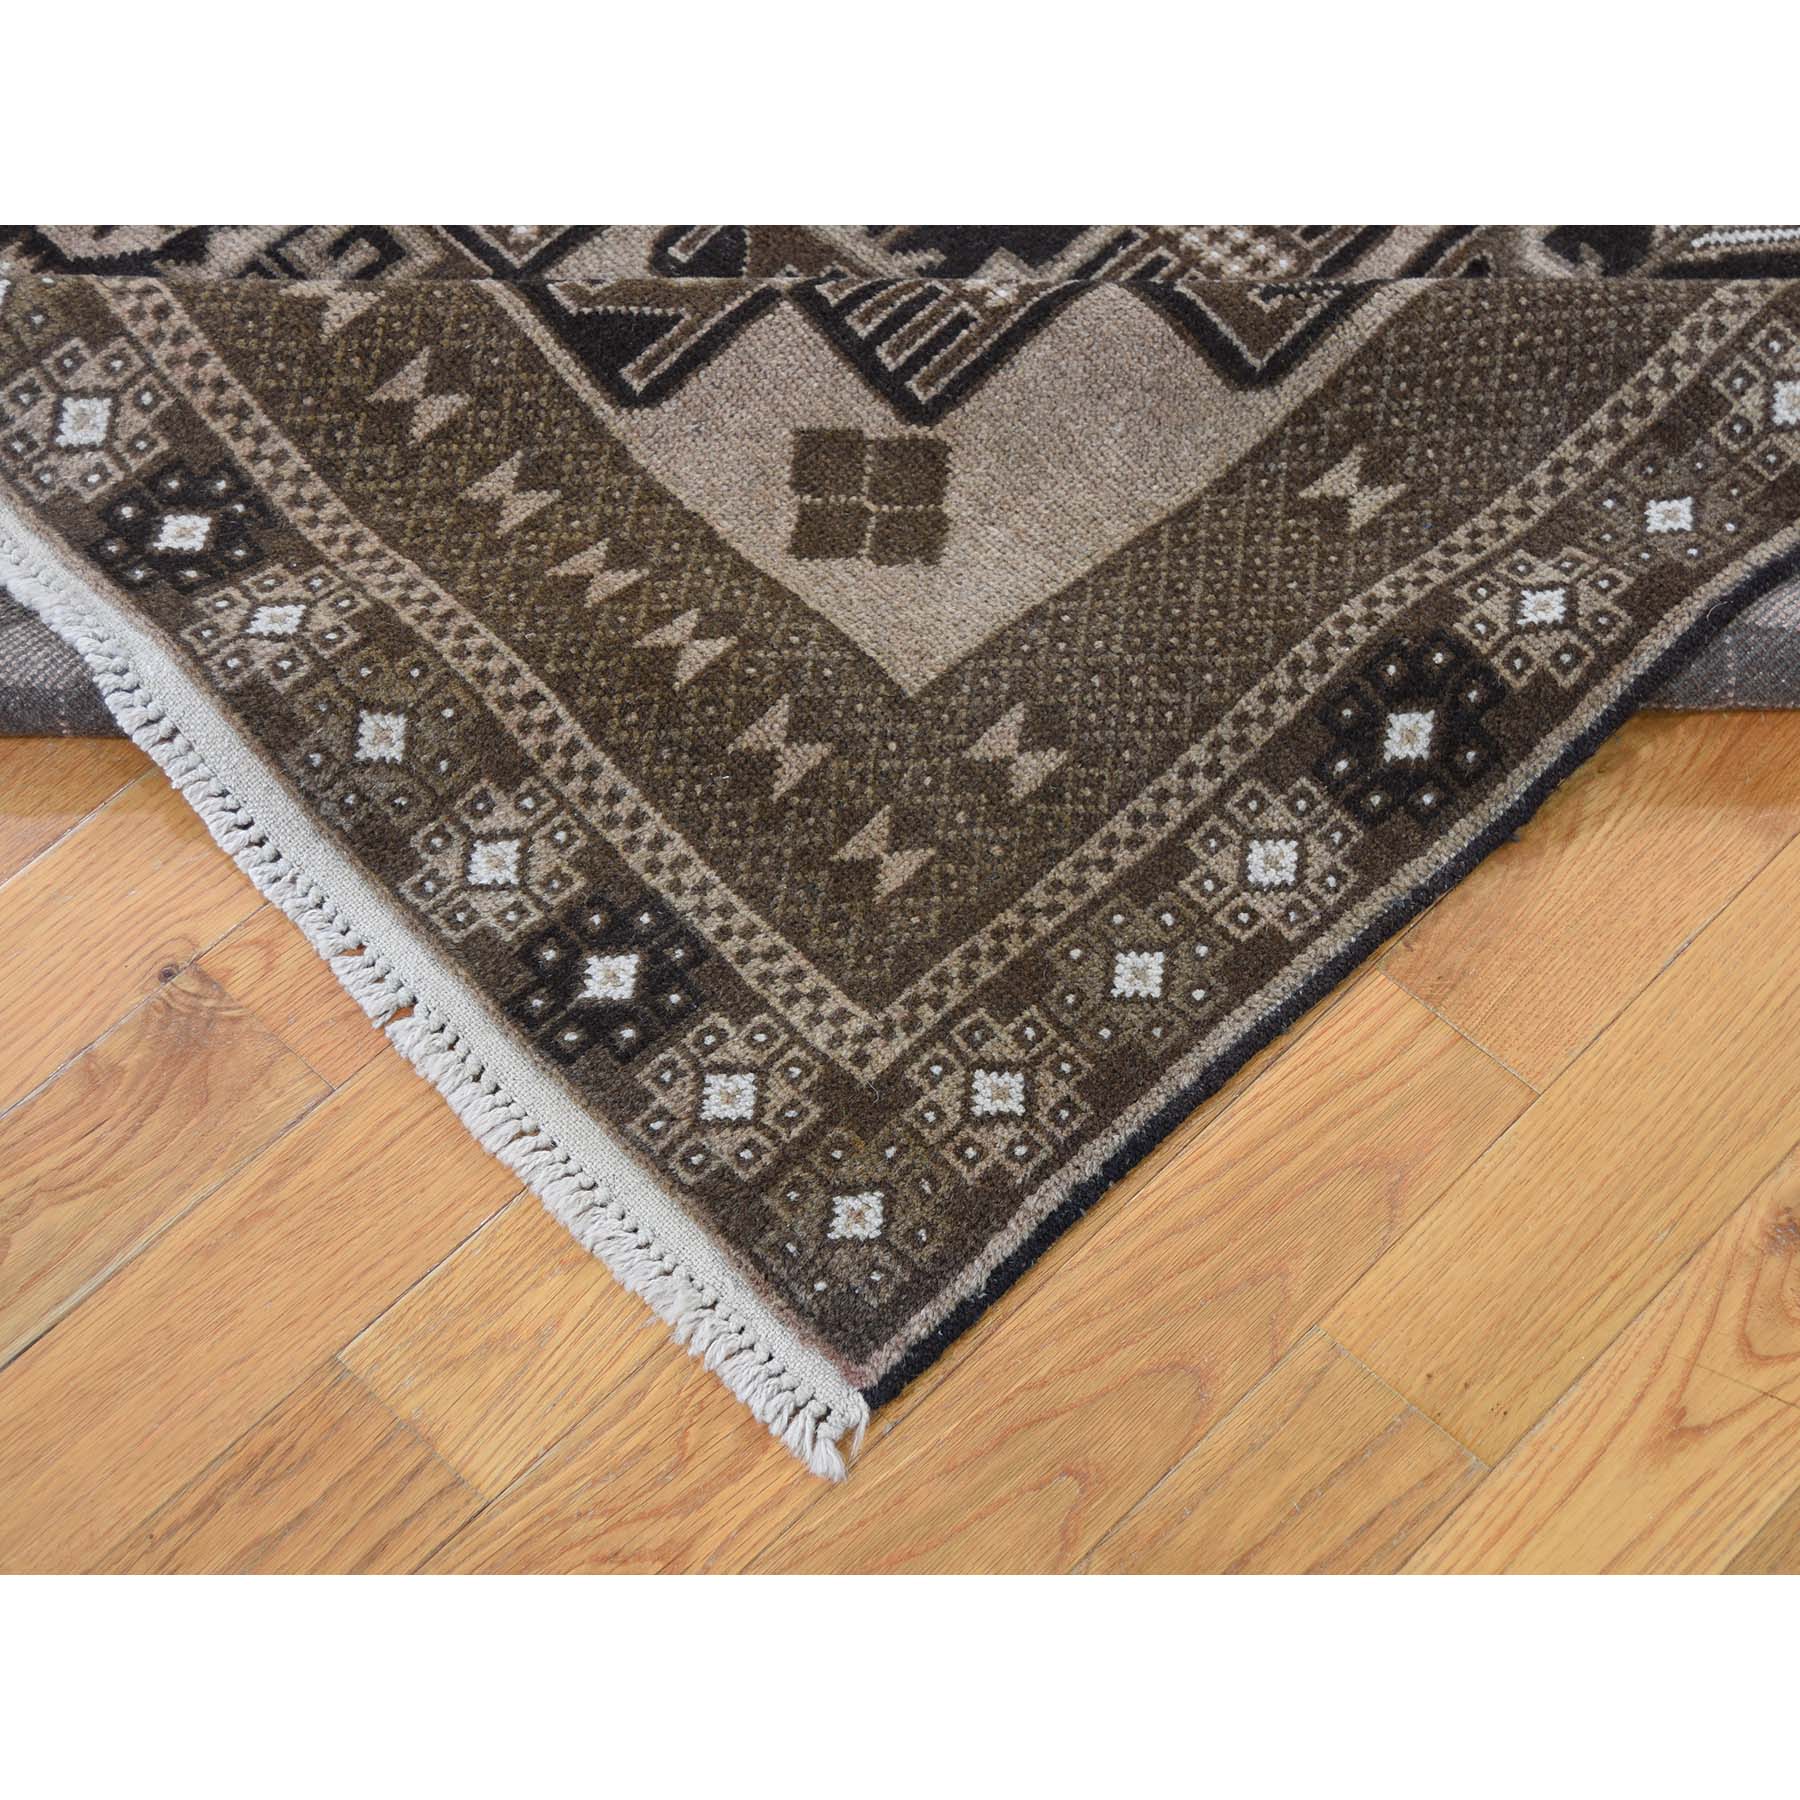 6'7"x8'10" Vintage Afghan Baluch Natural Color Hand Woven Pure Wool Oriental Rug 